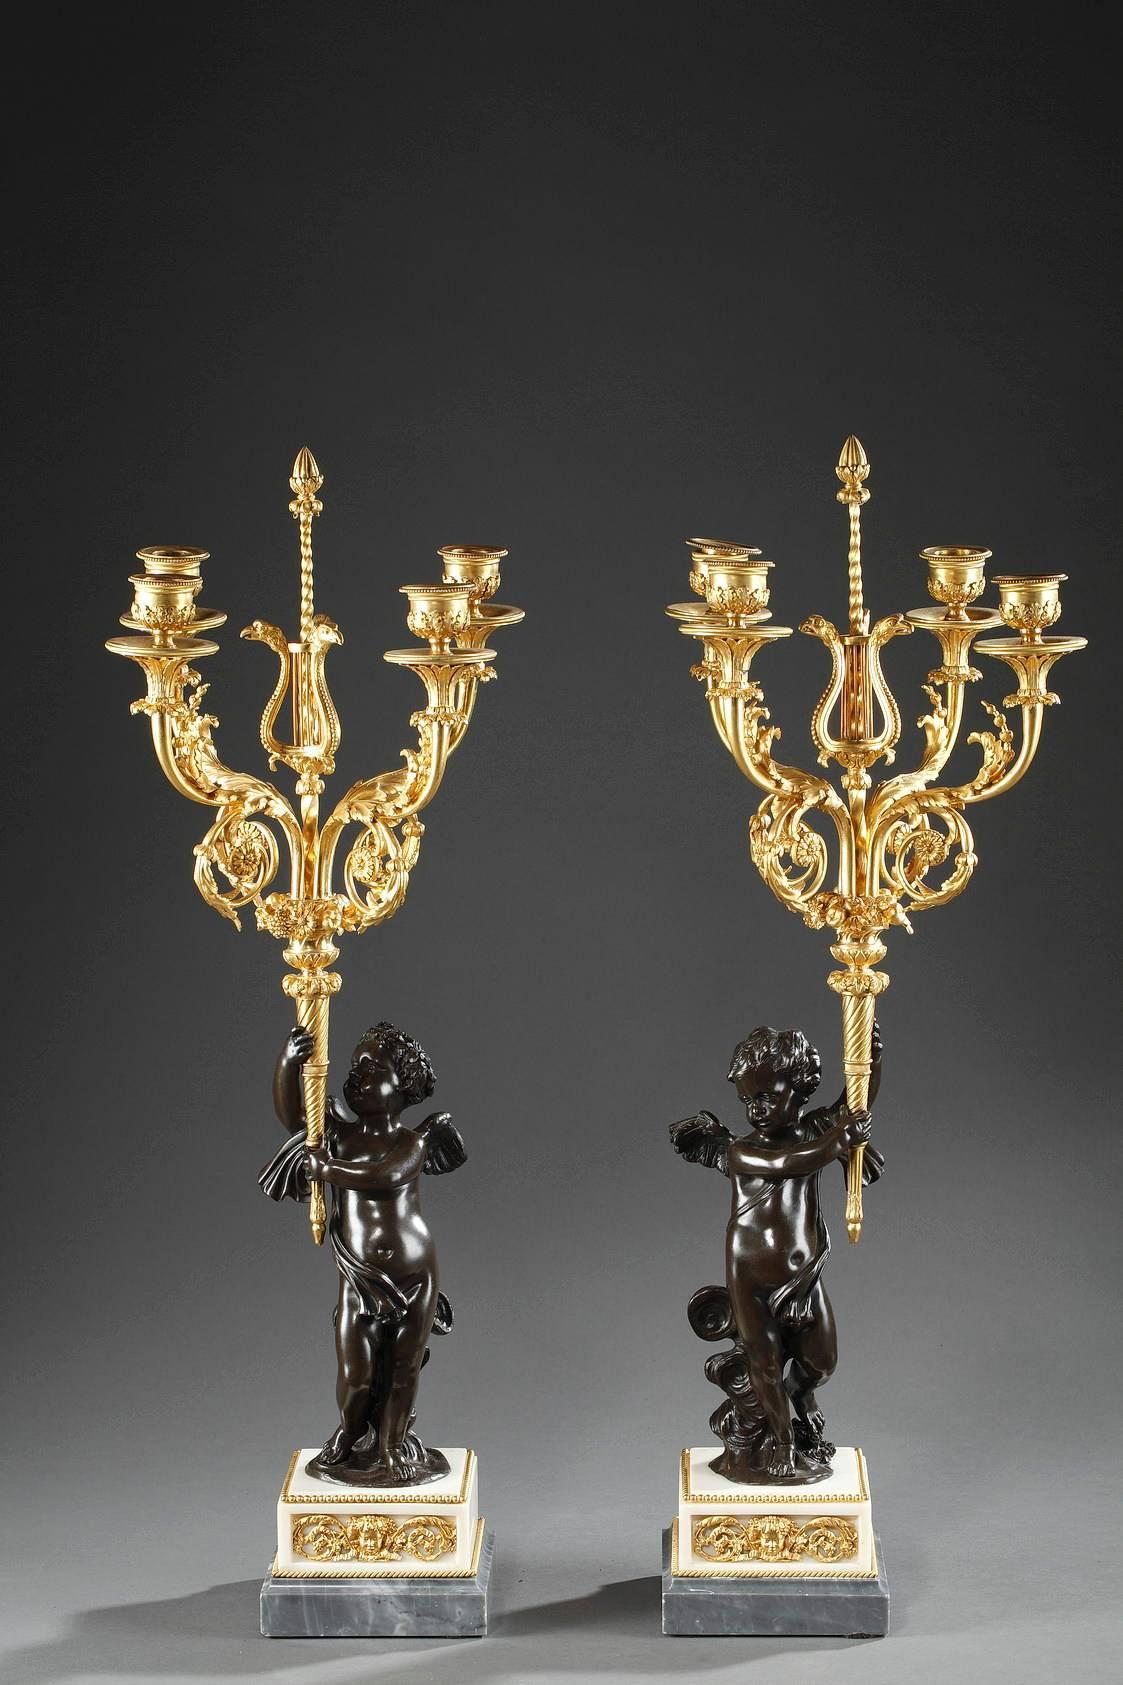 Exquisite pair of candelabra, composed of a young cupid on clouds in patinated bronze, holding an ormolu torch. A vase with flowers and fruits sits where the flame of the torch would be, and four candlestick arms extend out of the vase. The arms are